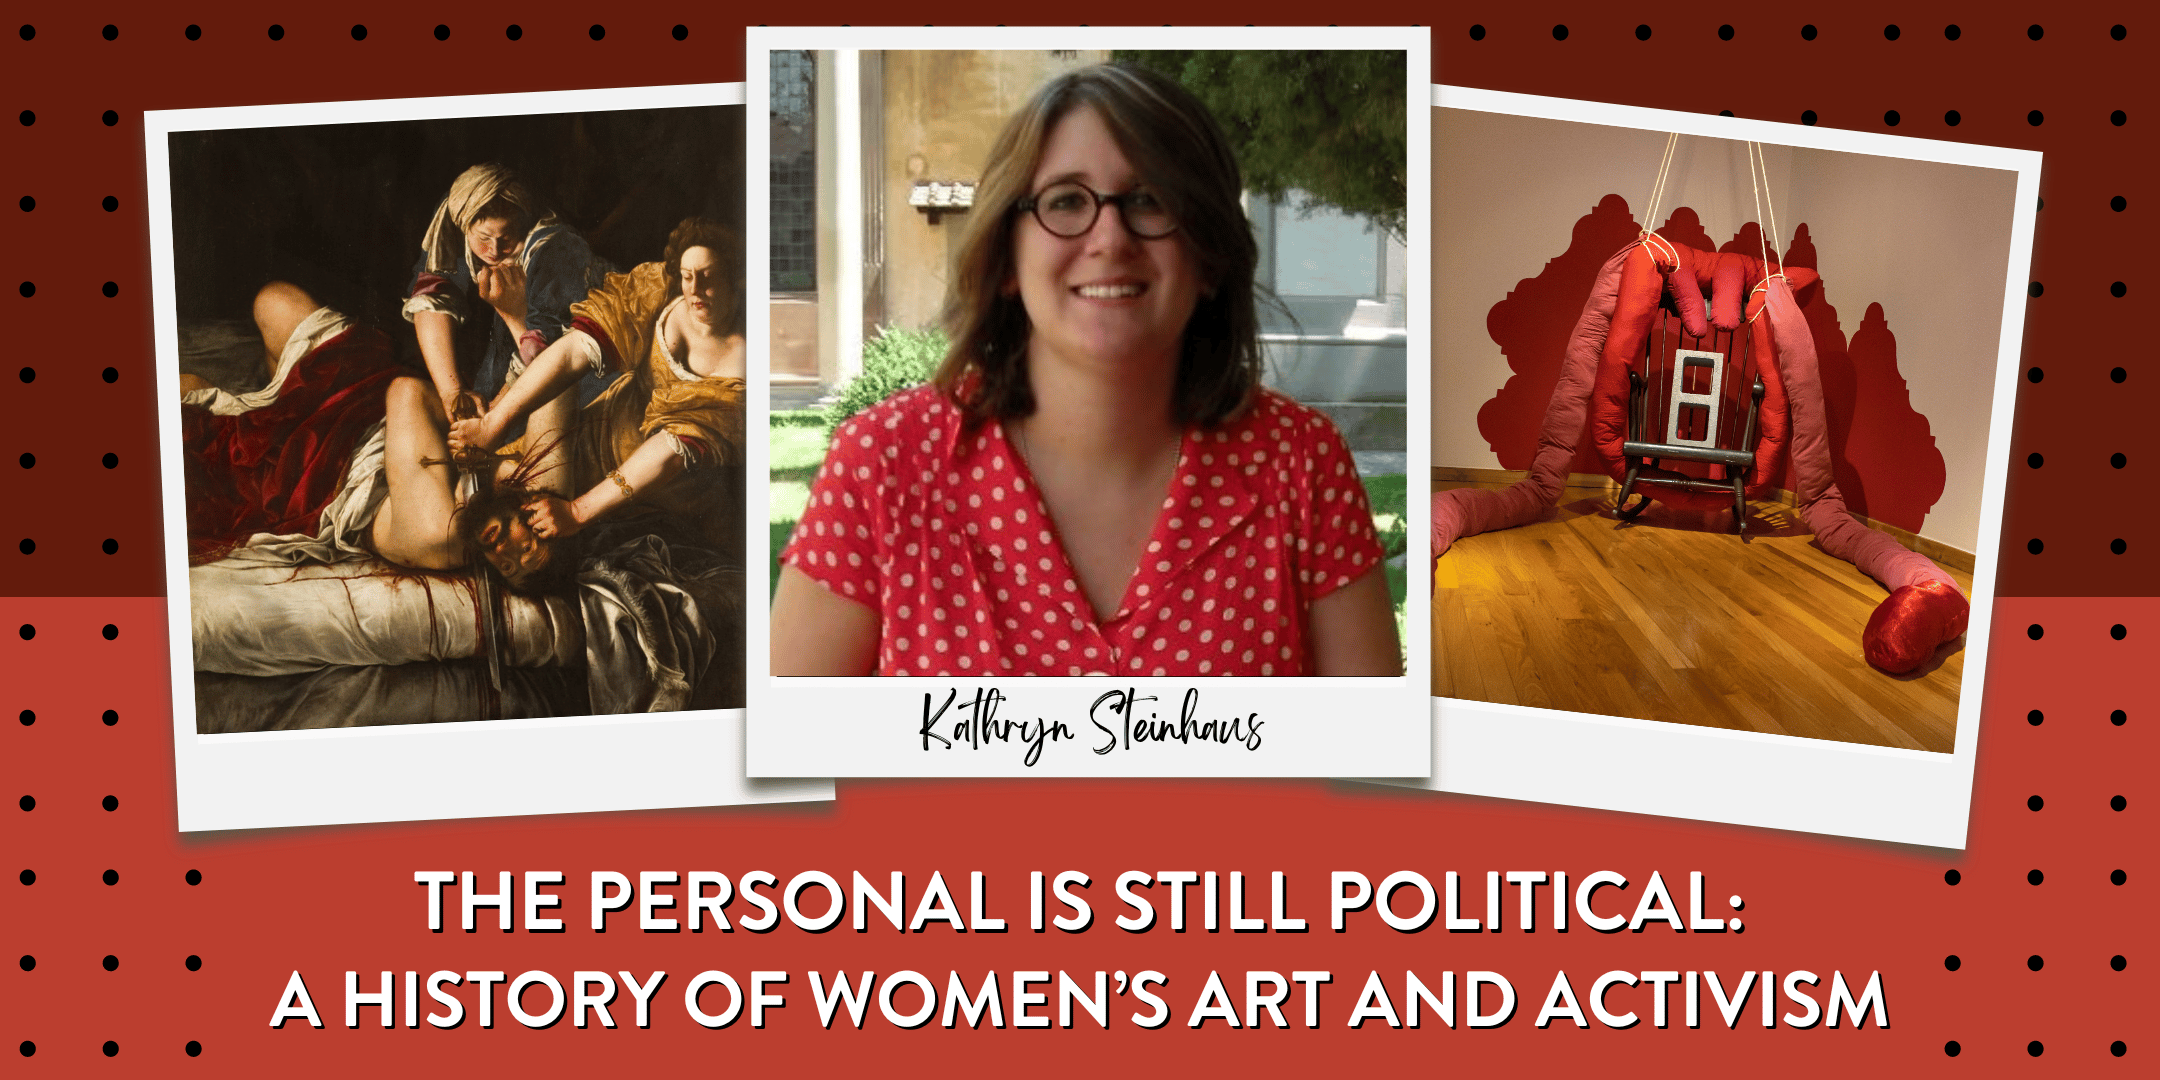 A photo of Kathryn Steinhaus, a white cis woman in her early forties with long brown hair and glasses in a red polka dot top, overlayed over two images of artwork: the famous beheading of John by Artemisia Gentilischi and The Caretaker, a large soft sculpture of an abstracted female form tied to a brick in a rocking chair by Jessica Caldas.